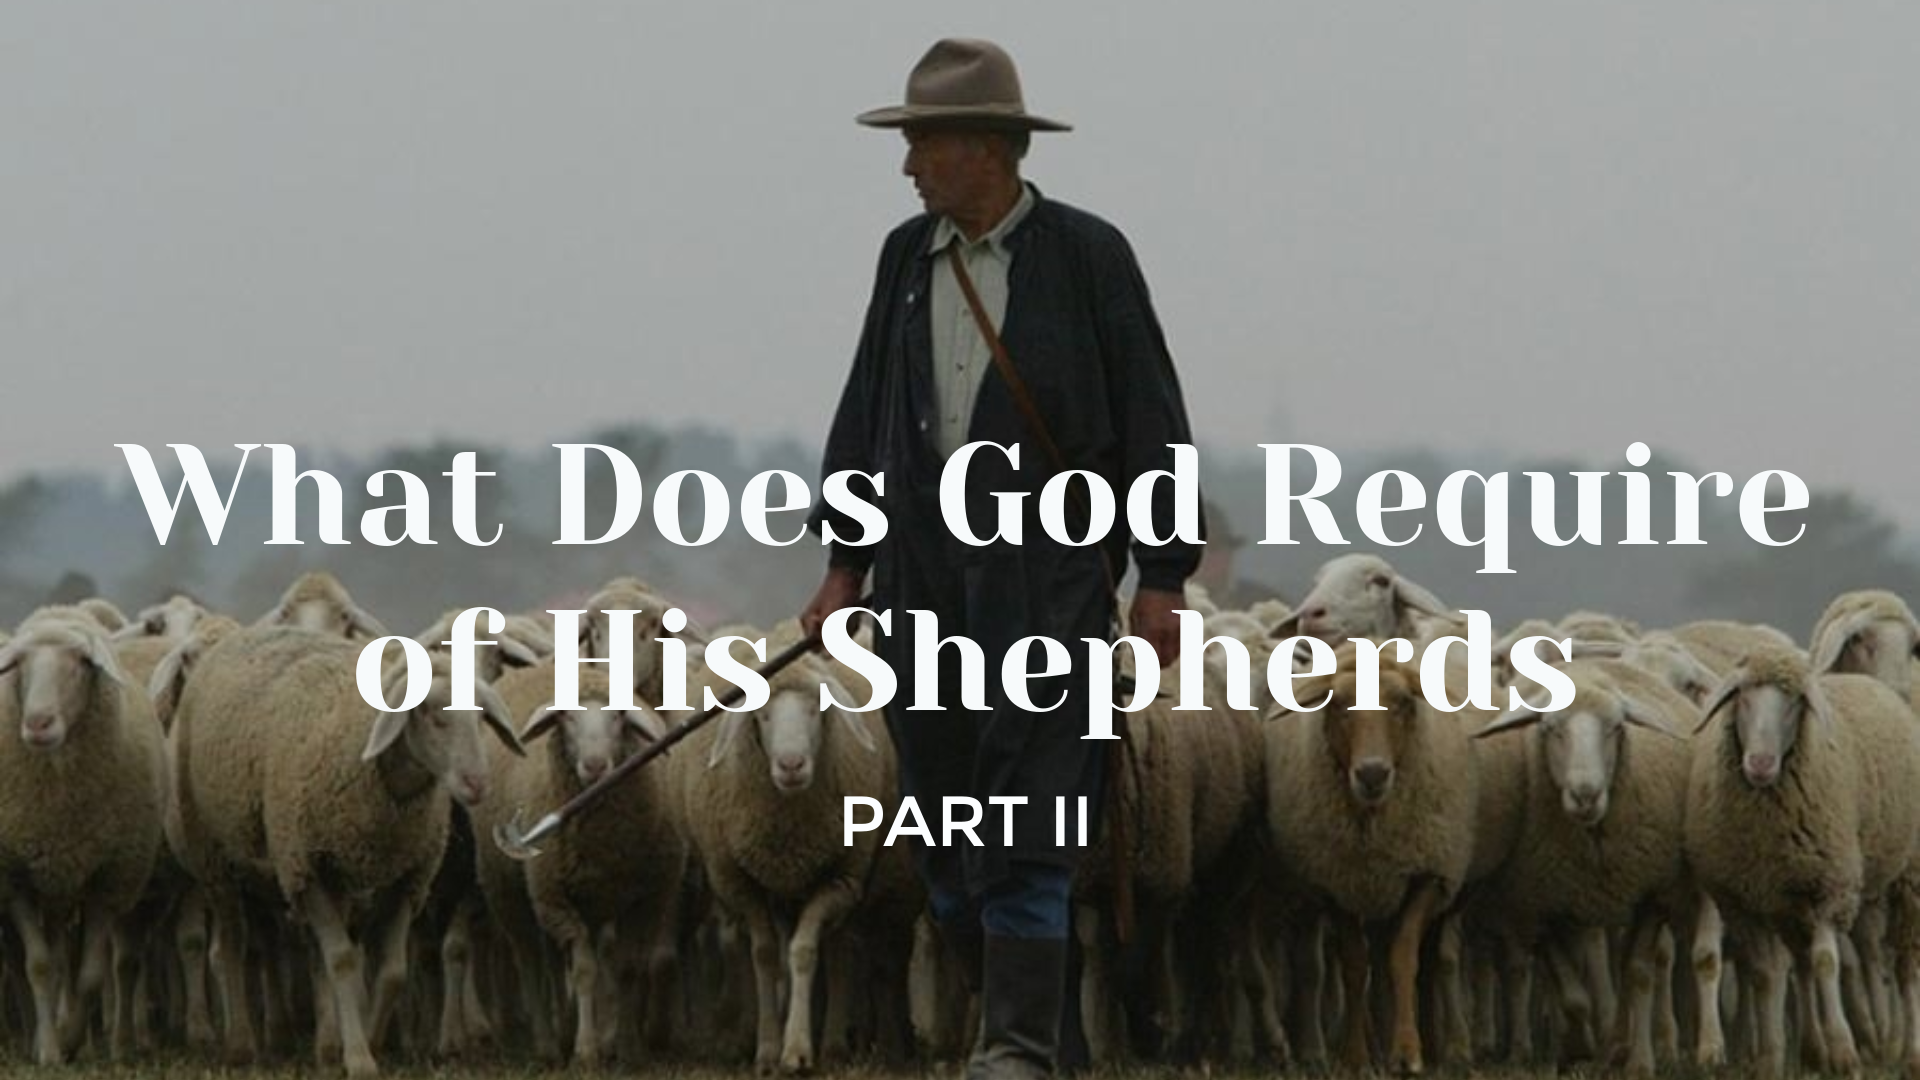 What Does God Require of His Shepherds (II)